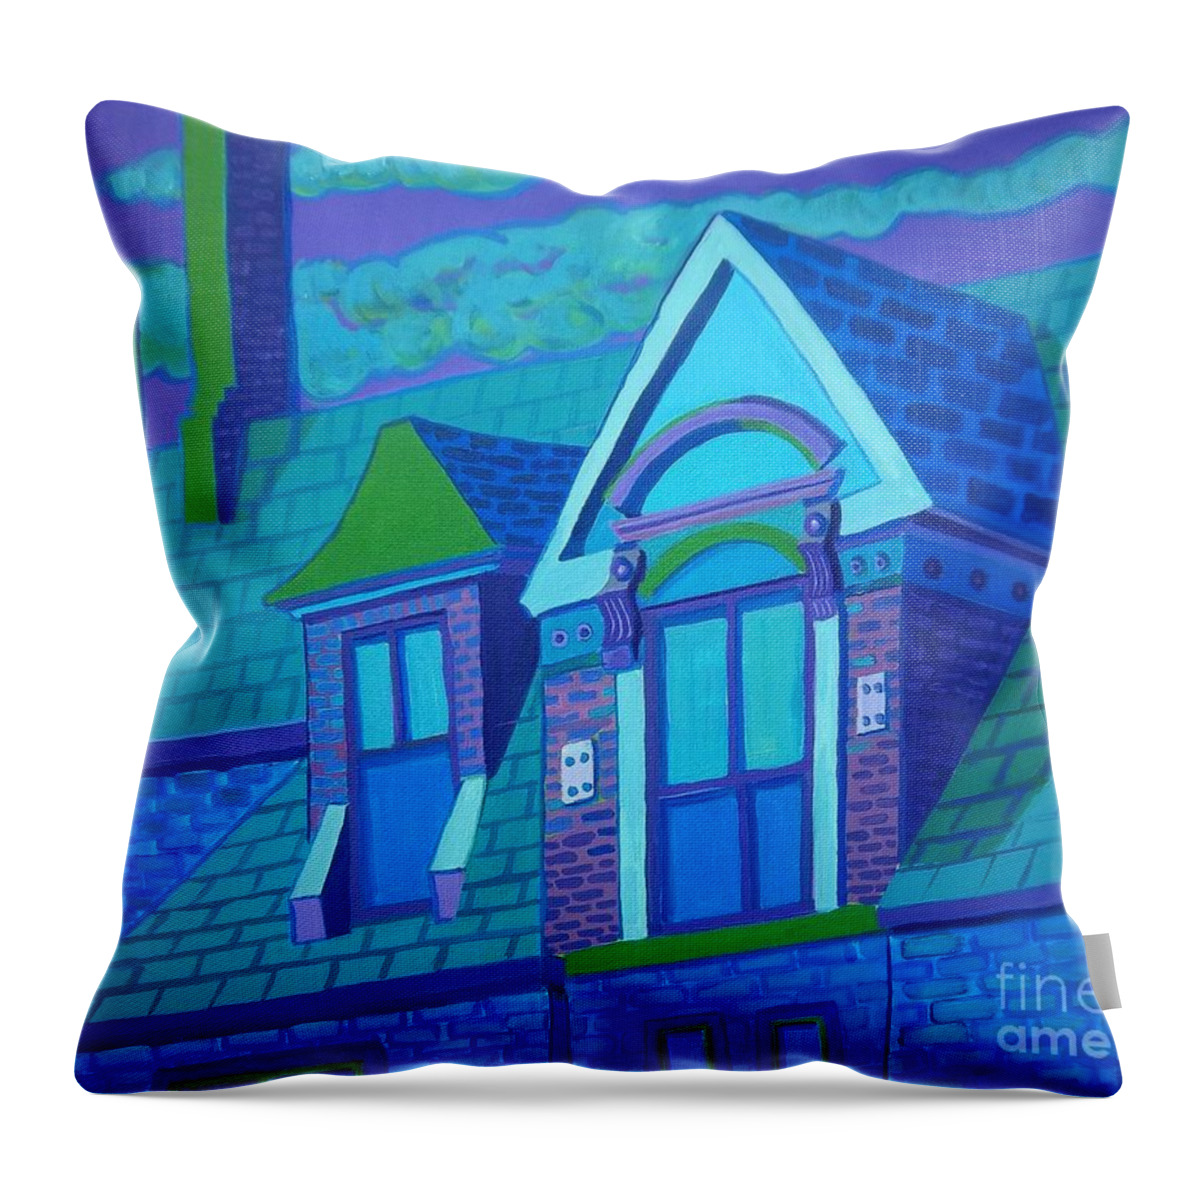 Blue Throw Pillow featuring the painting Blue Gloucester Rooftop by Debra Bretton Robinson